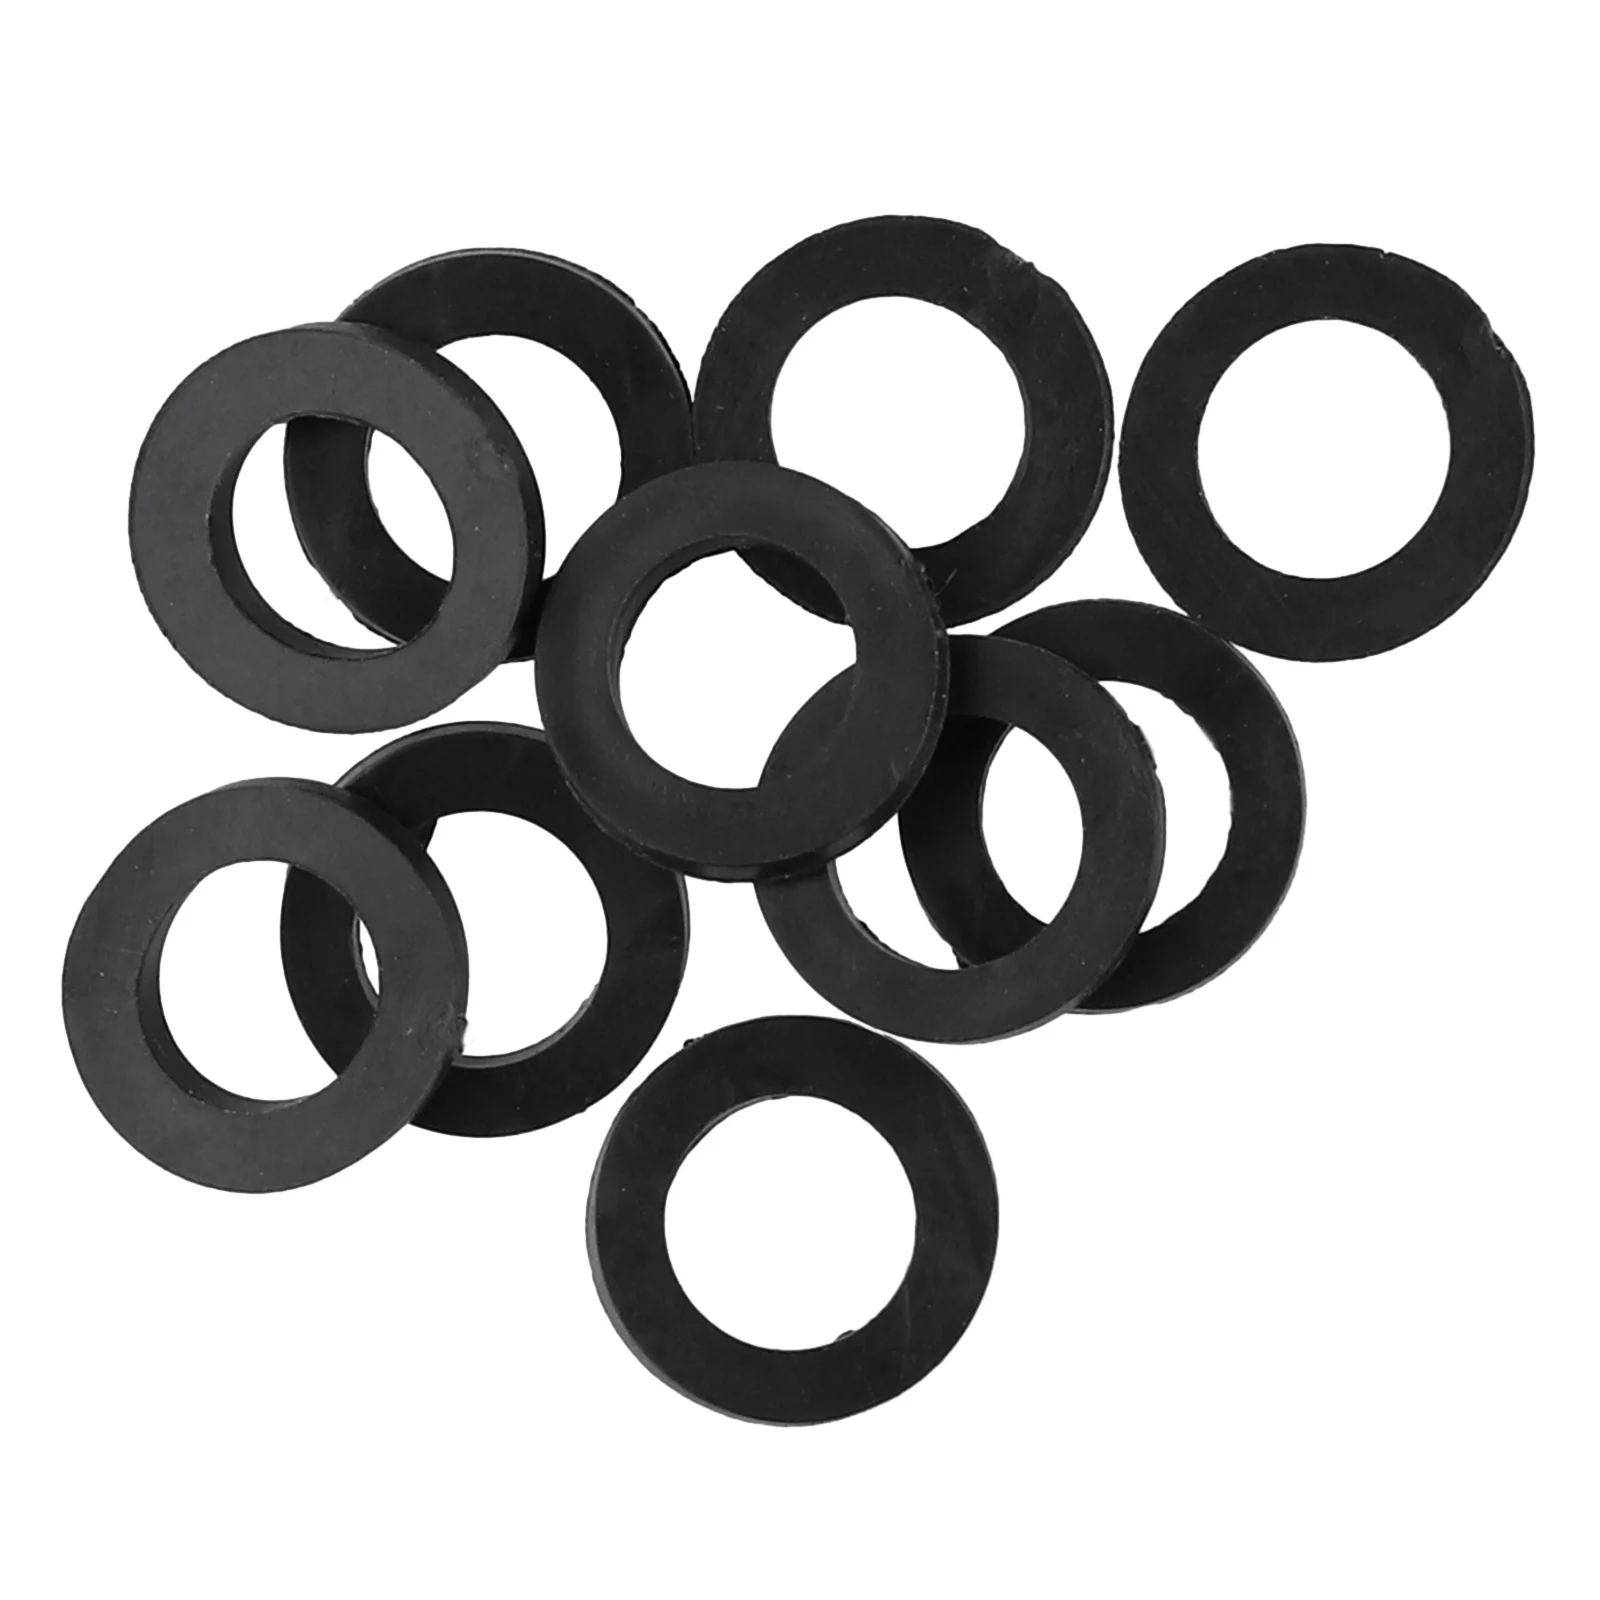 

10Pcs Shower Hose Seal Rubber Washers Tap Washers Half Inch Rubber Ring Flat Gasket Sealing Ring Flexible Pipe